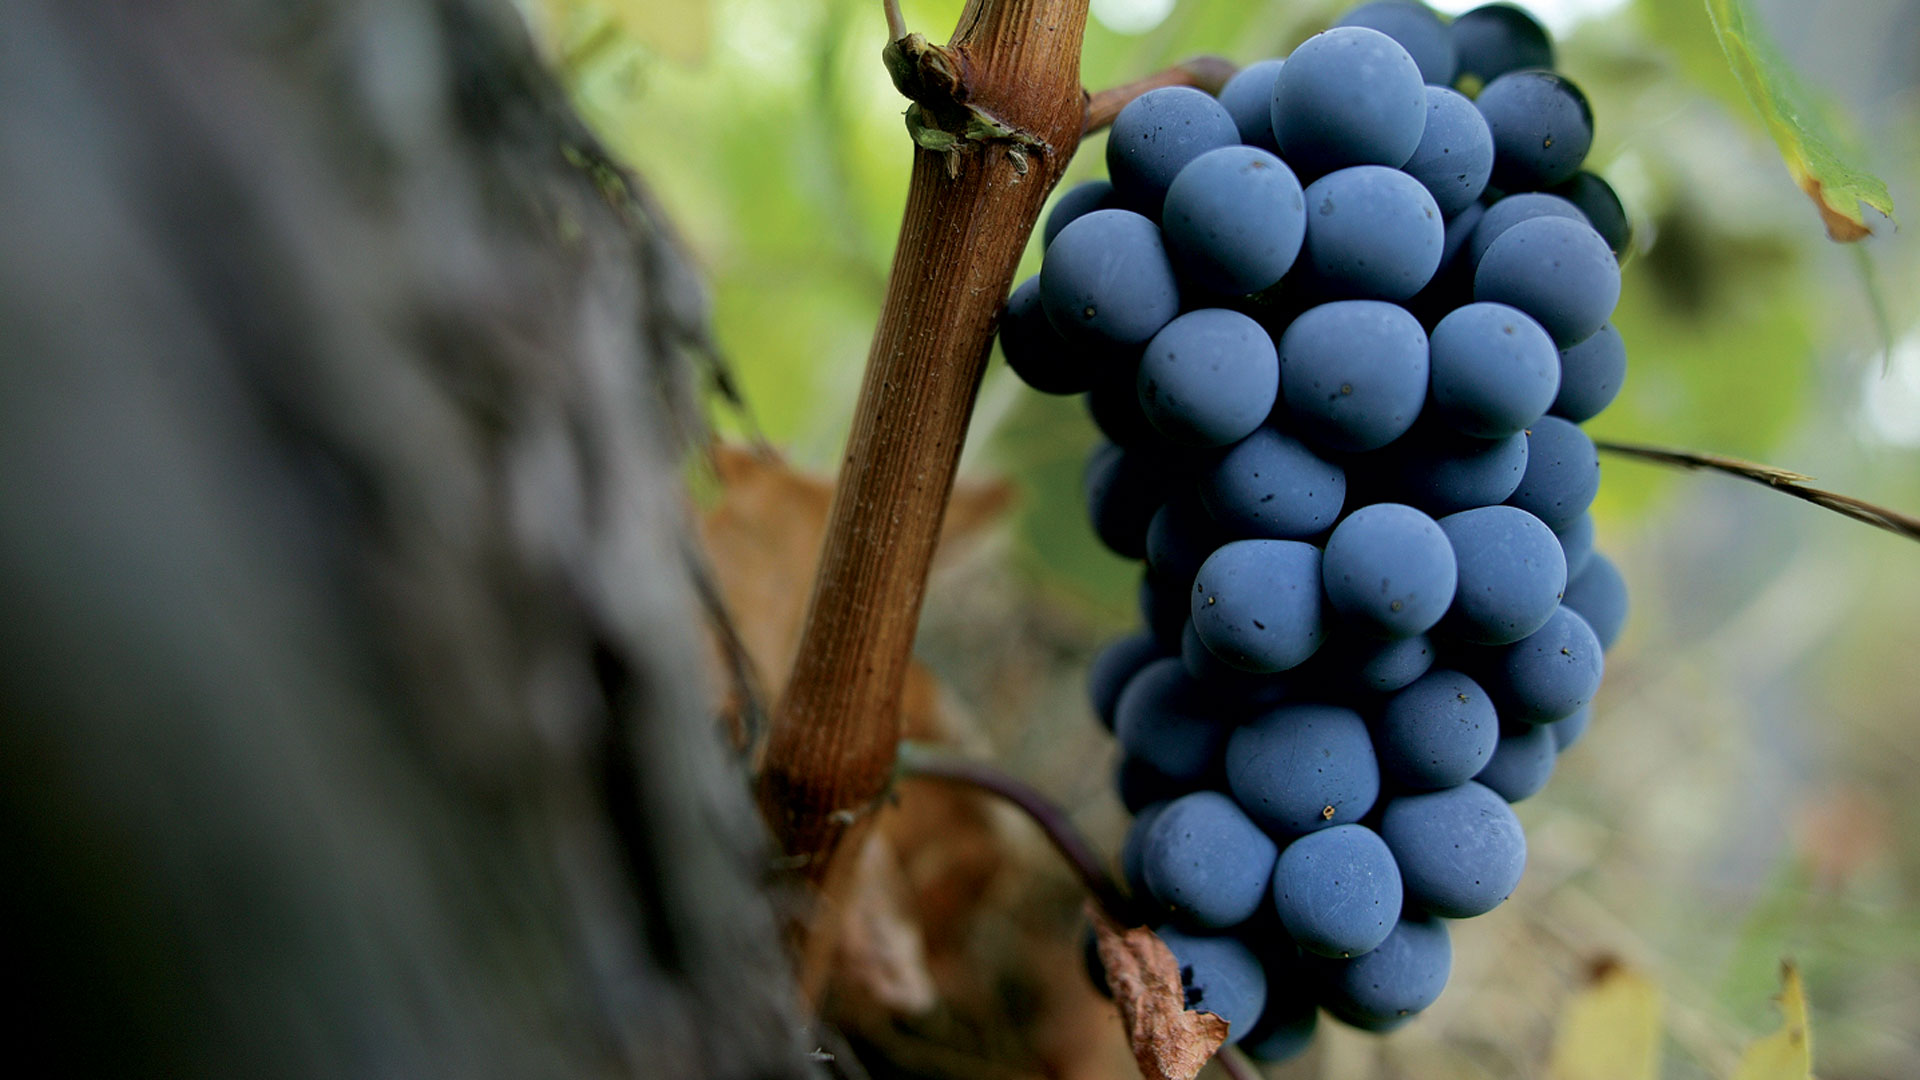 You will be introduced to local grape varieties you probably never knew existed